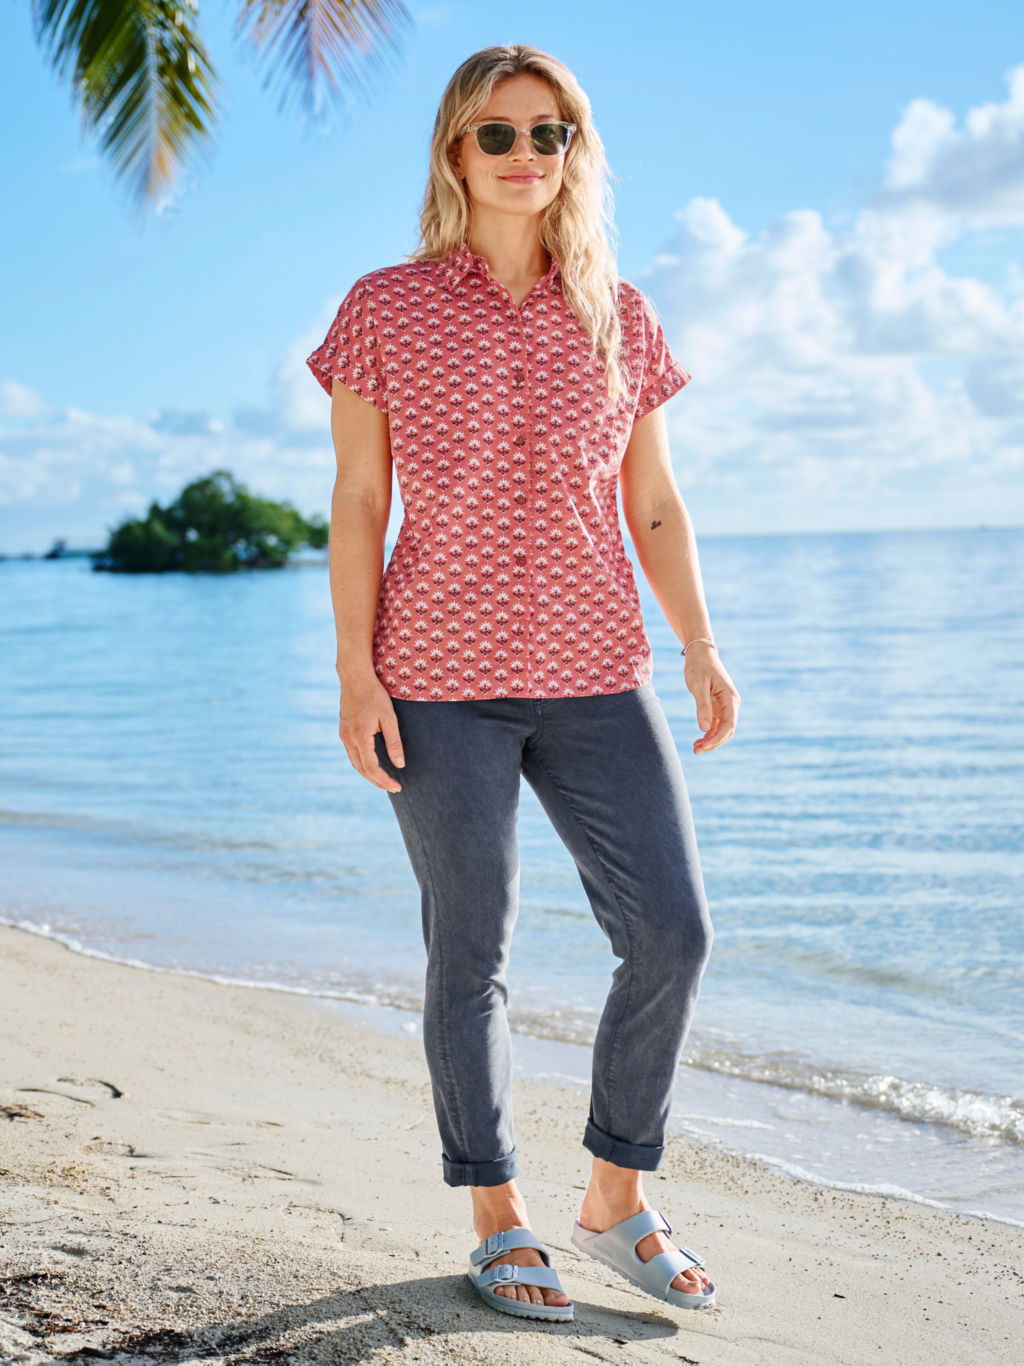 A blonde woman wearing sunglasses, a red patterned short sleeved button down shirt and deep navy pants.